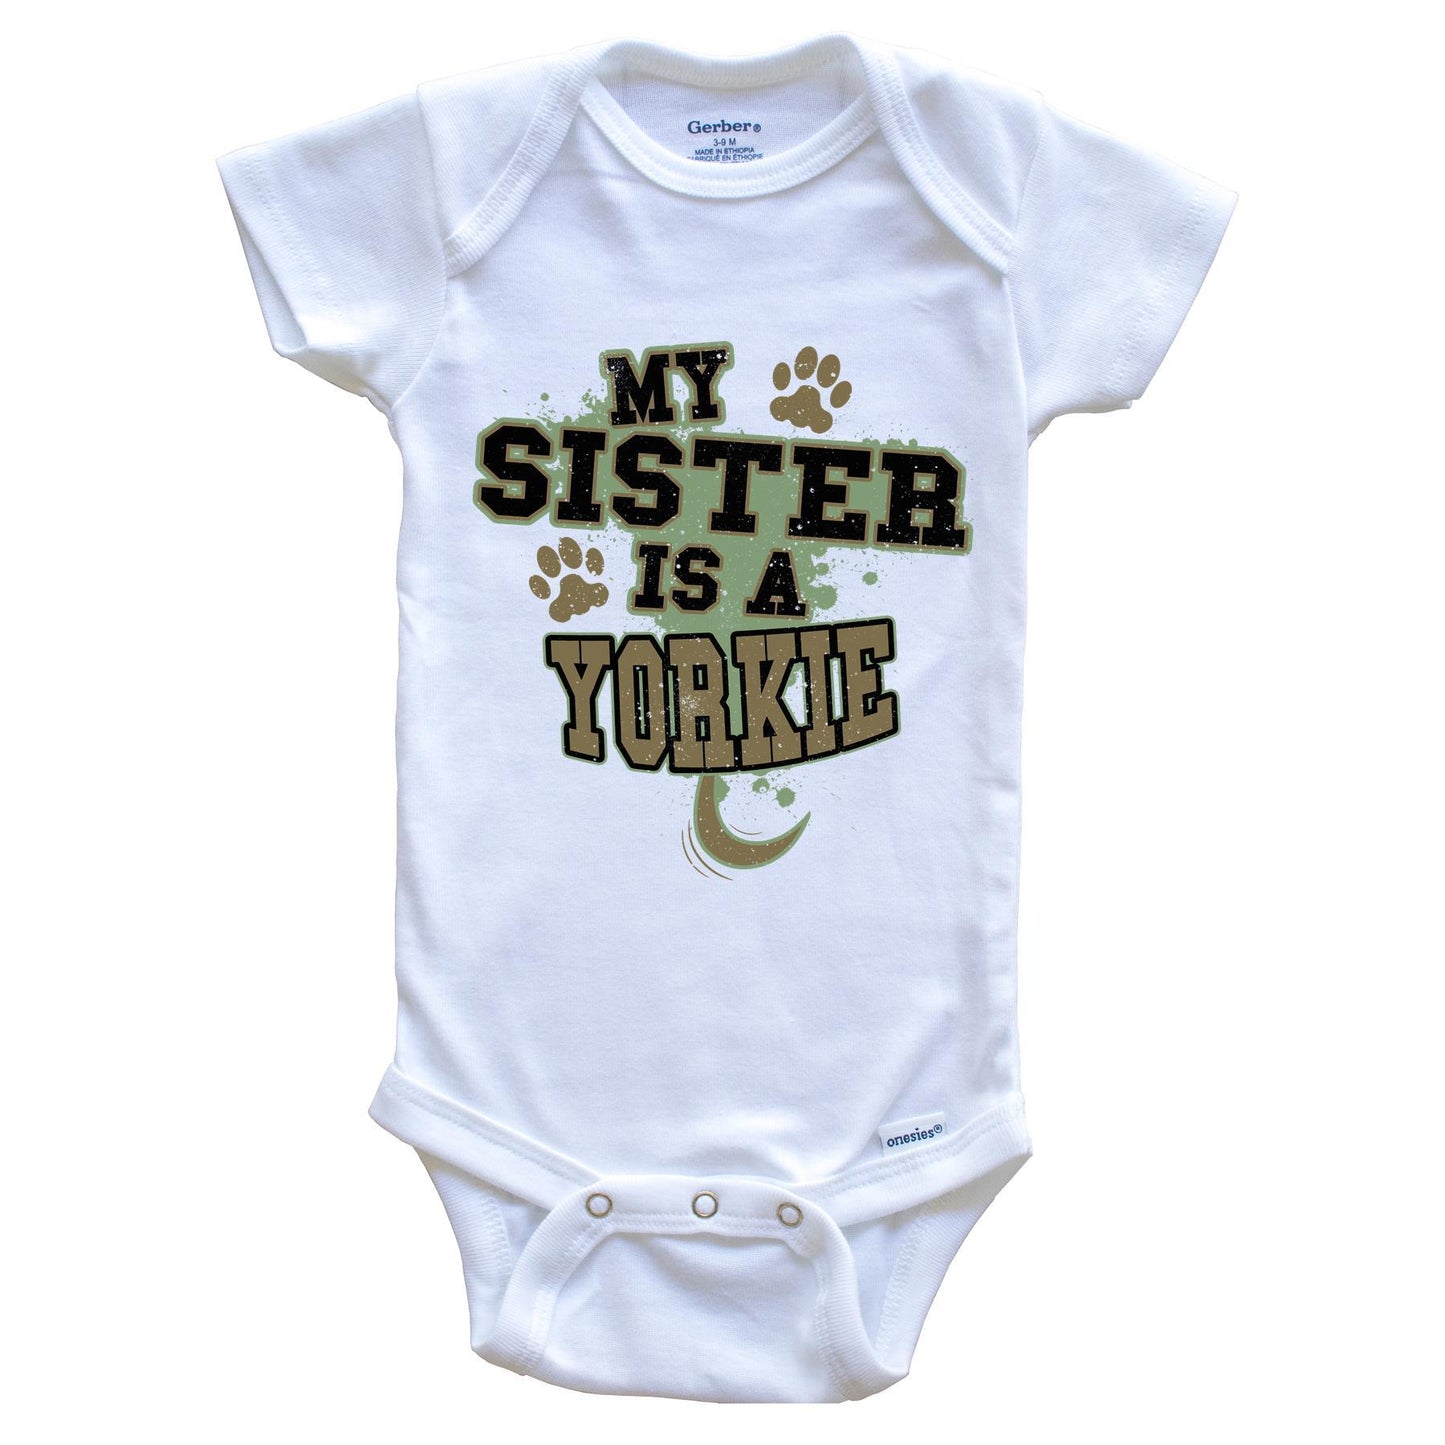 My Sister Is A Yorkie Funny Dog Baby Onesie